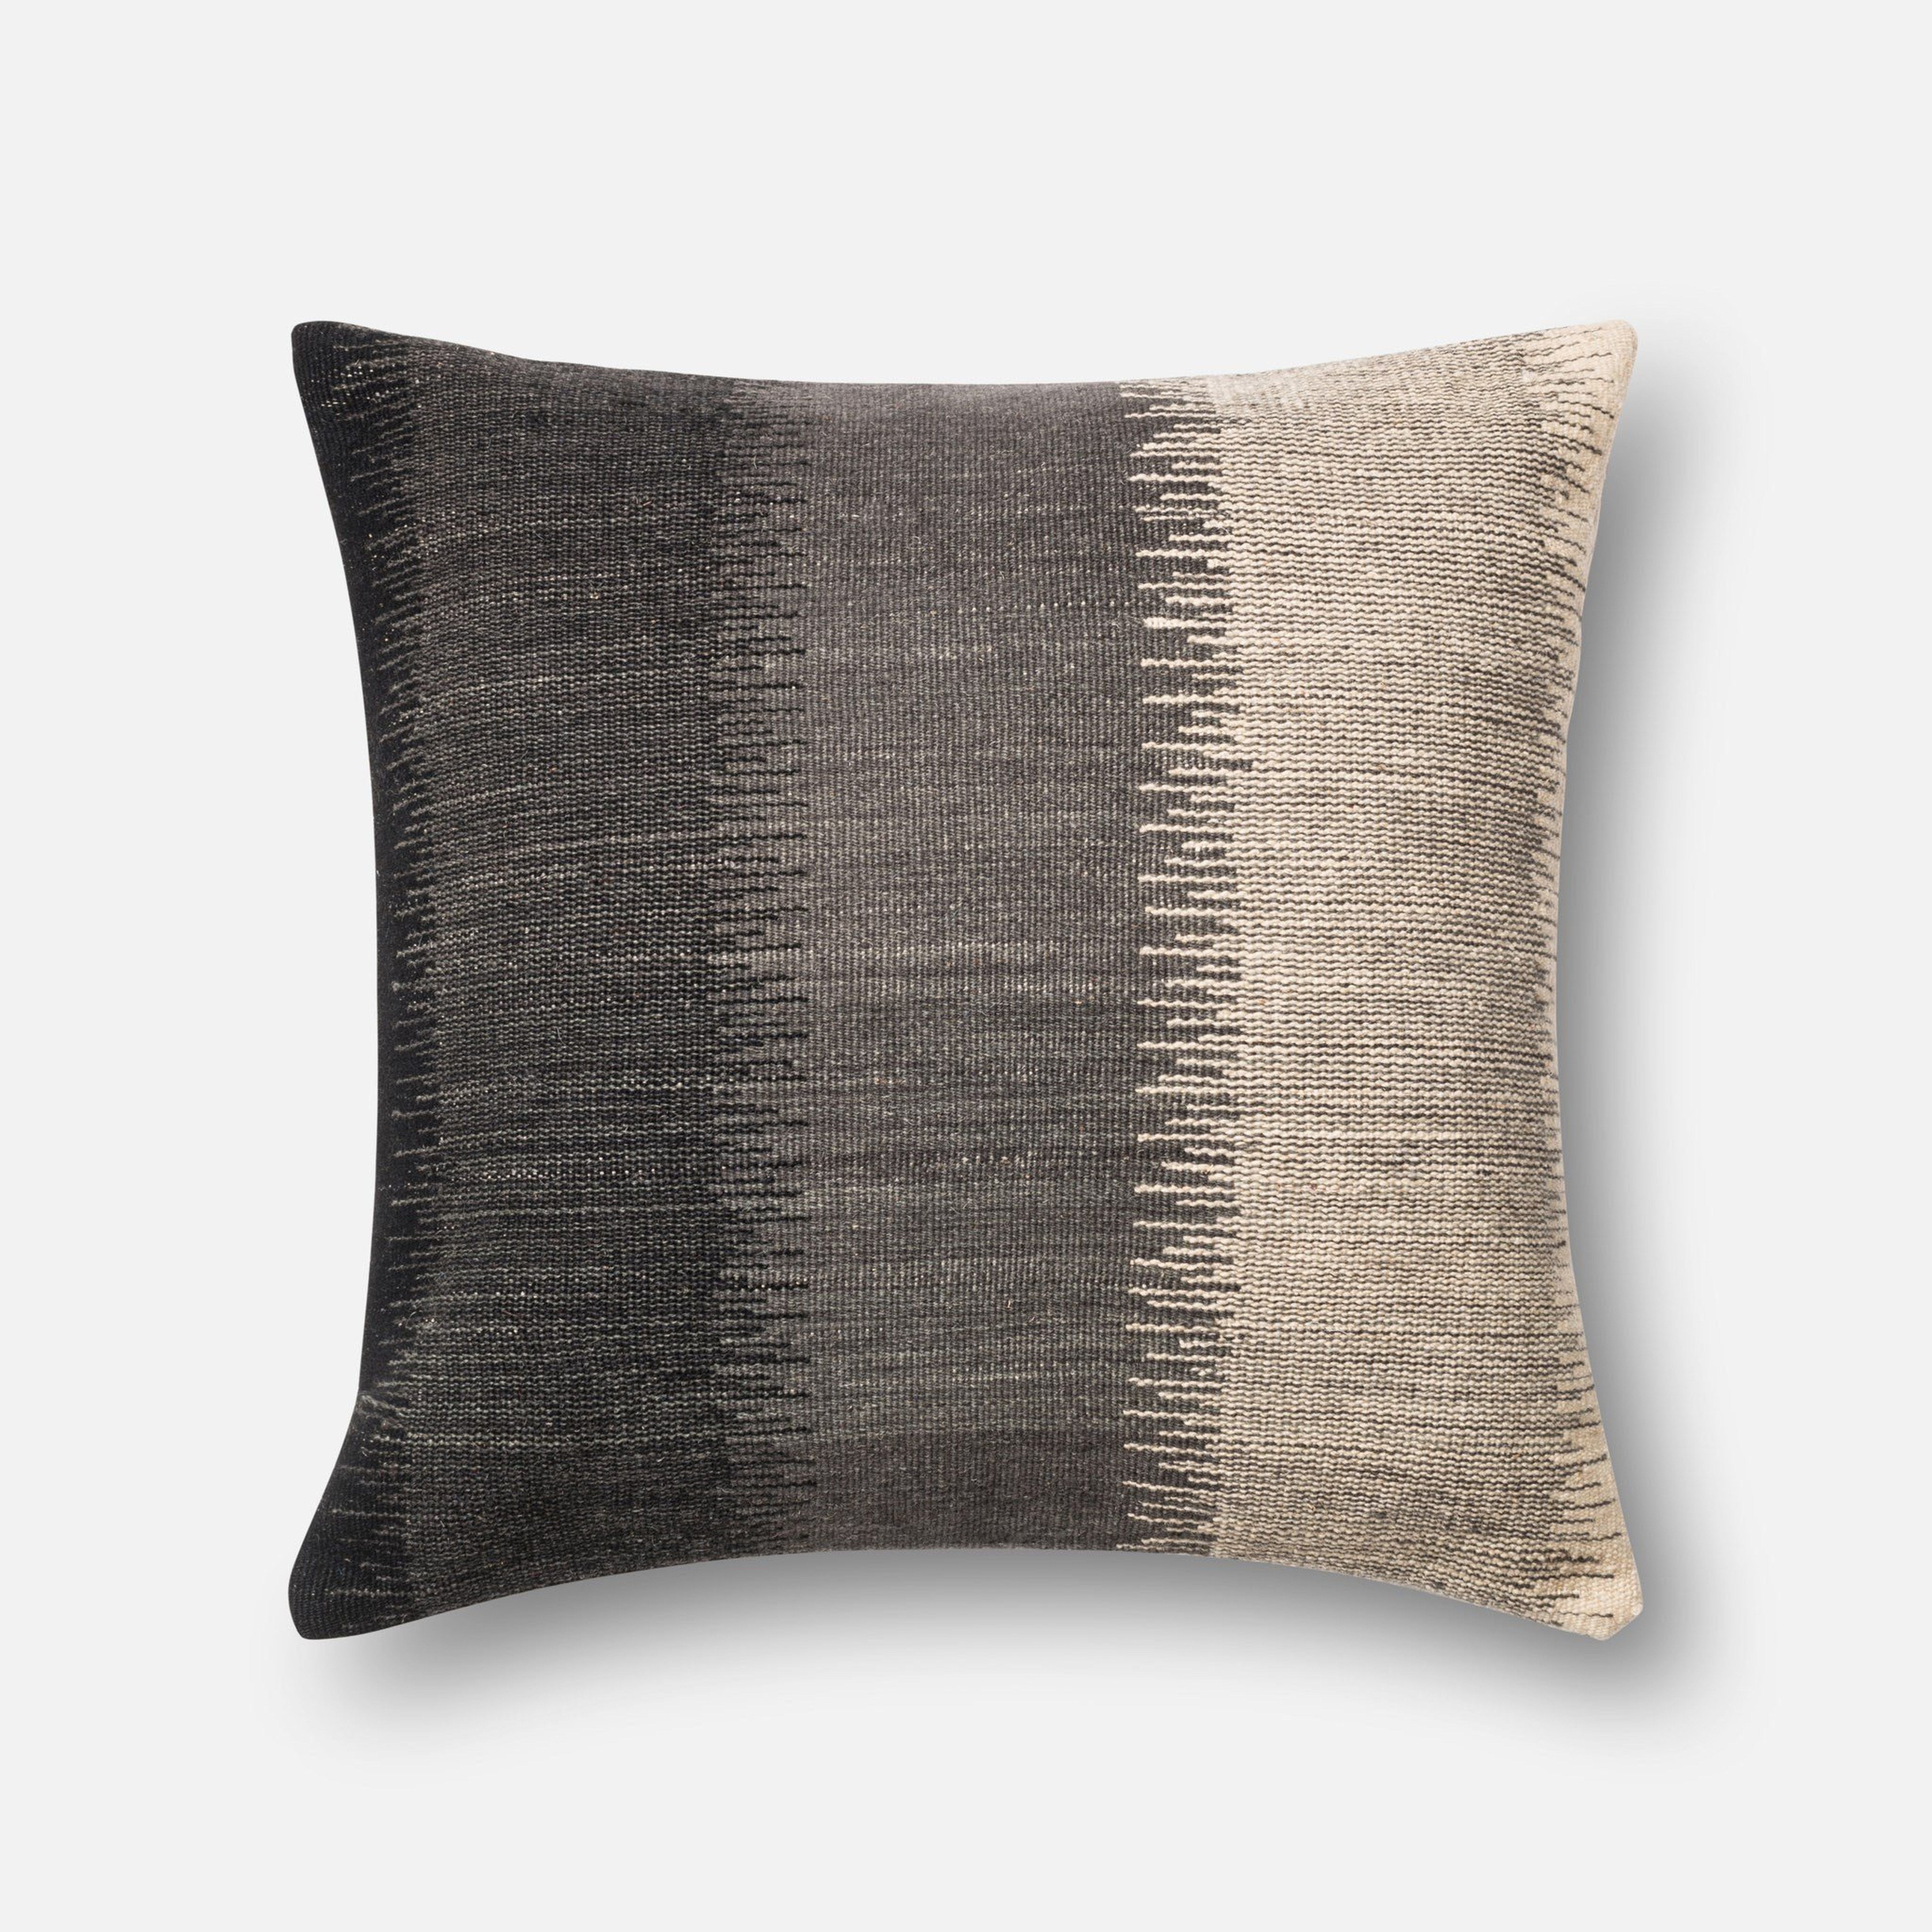 PILLOWS - GREY / IVORY - 22" X 22" Cover Only - Loma Threads